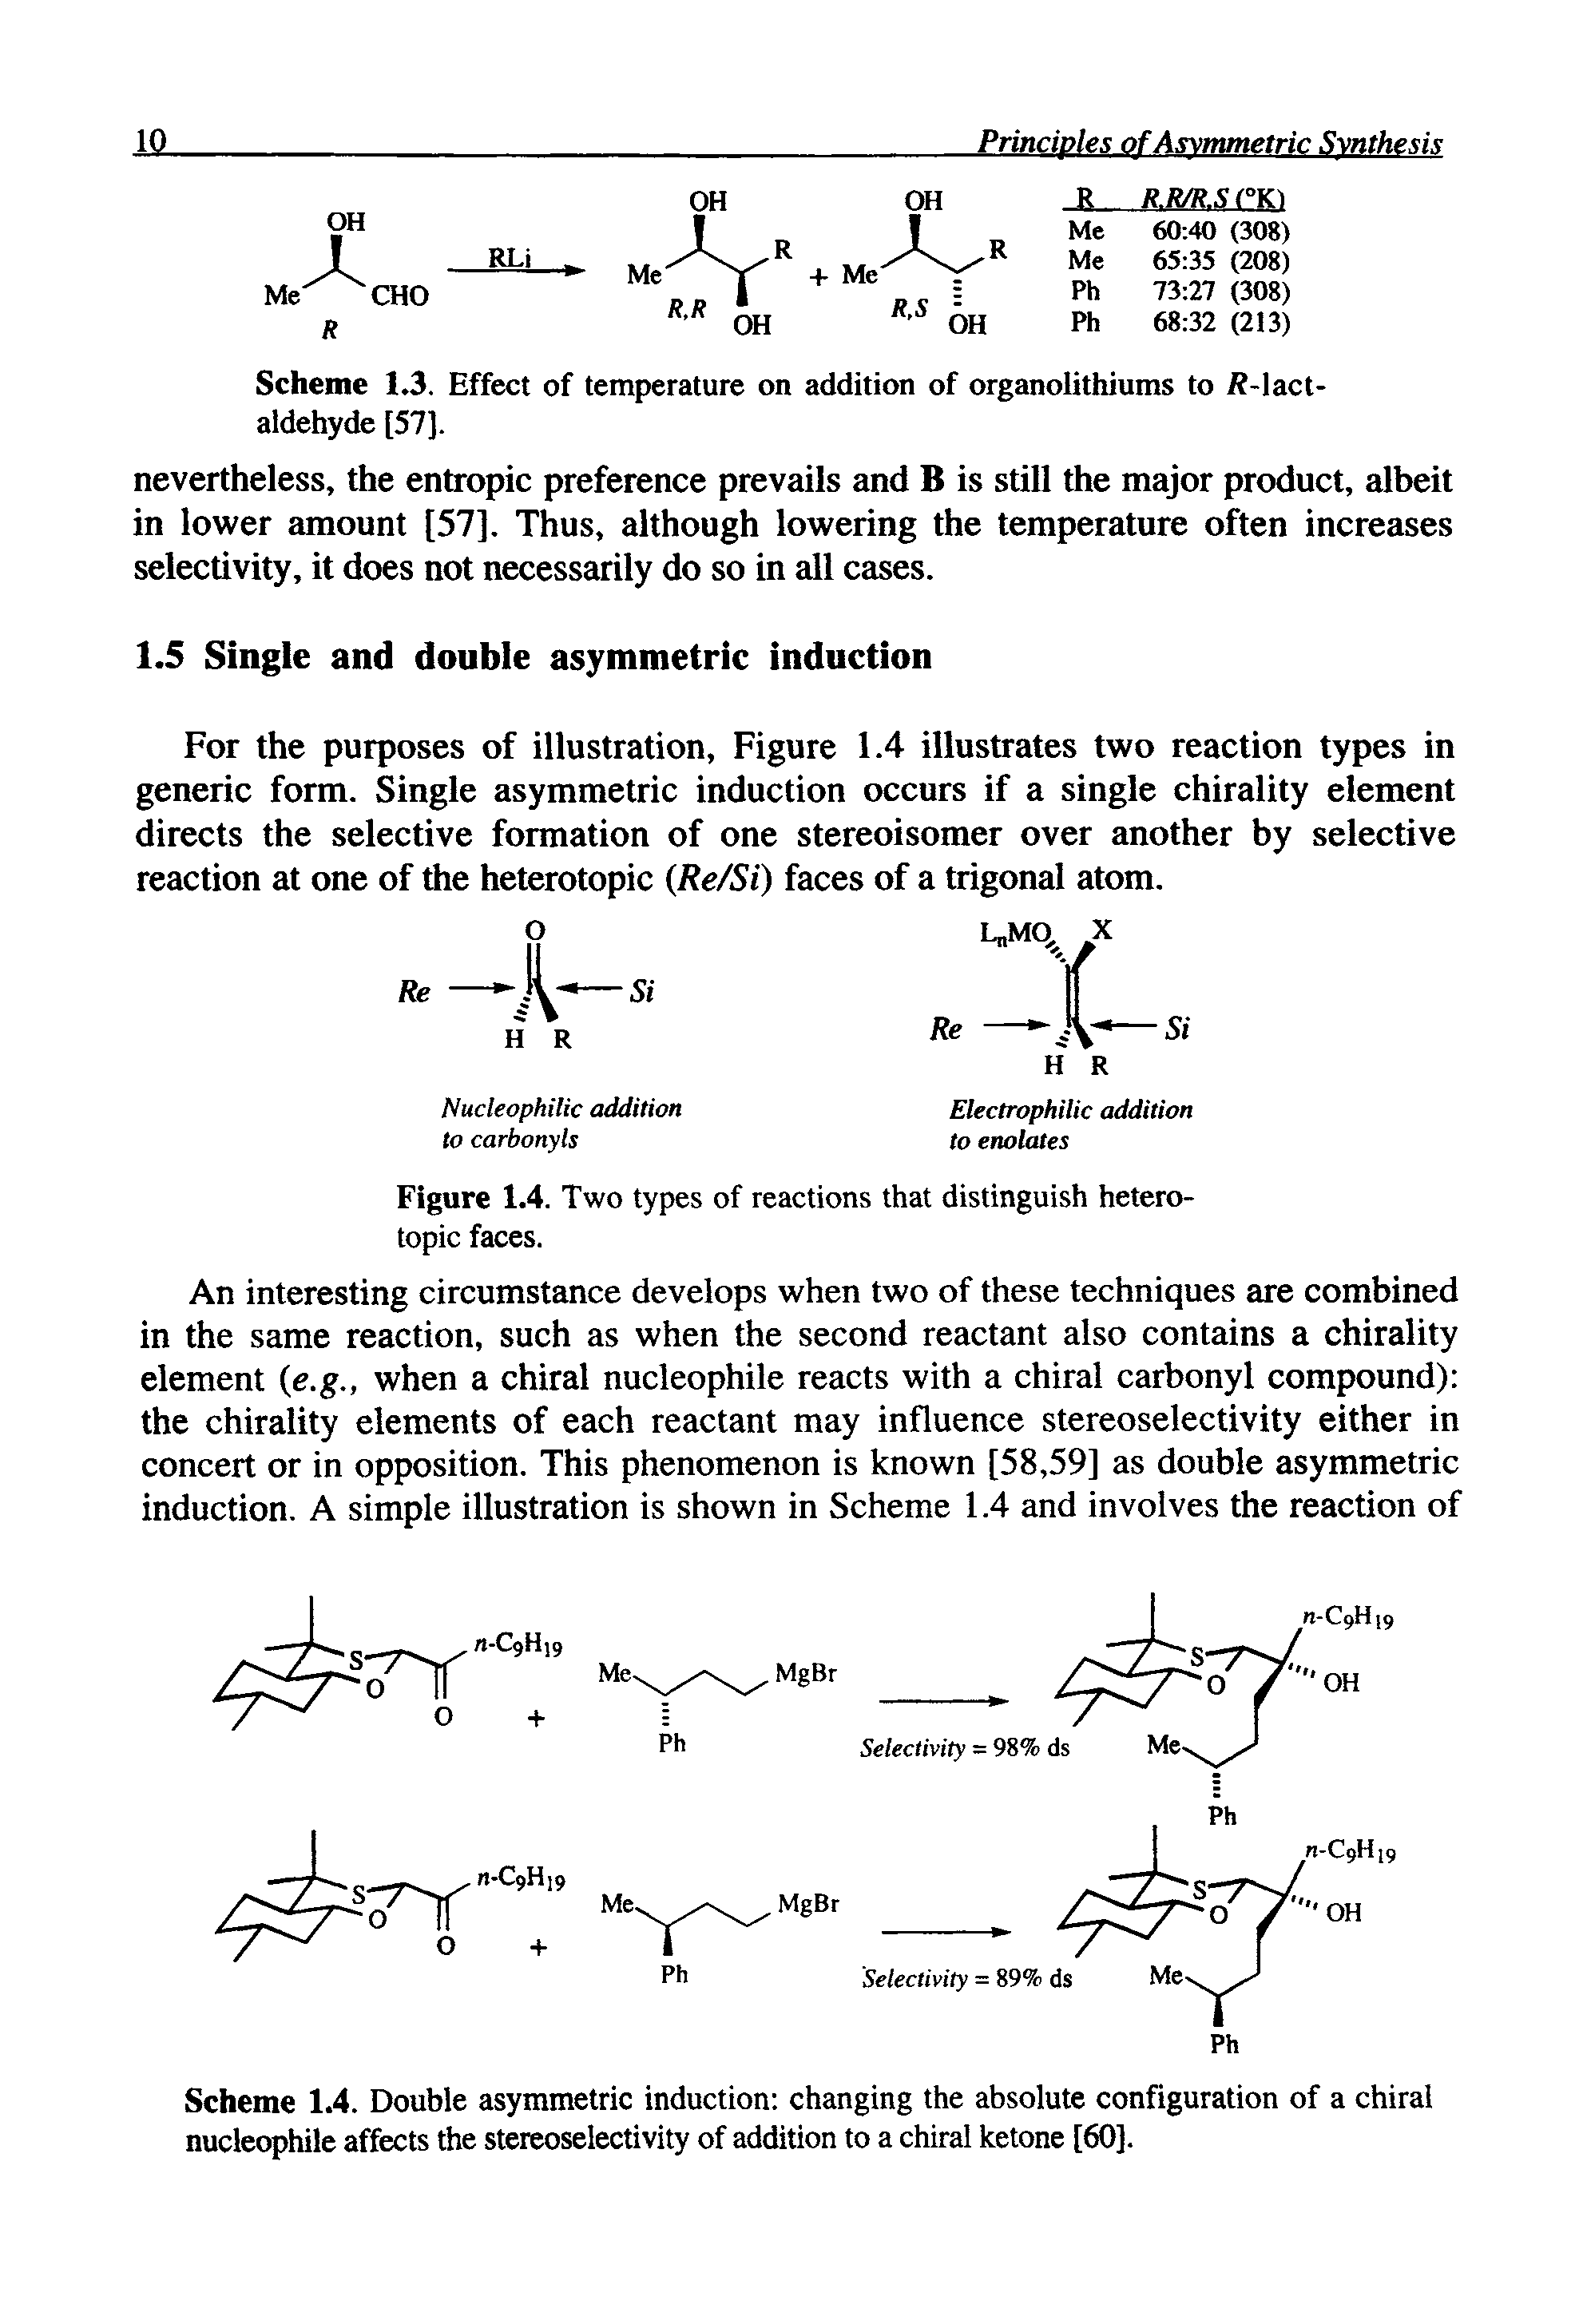 Scheme 1.4. Double asymmetric induction changing the absolute configuration of a chiral nucleophile affects the stereoselectivity of addition to a chiral ketone [60].